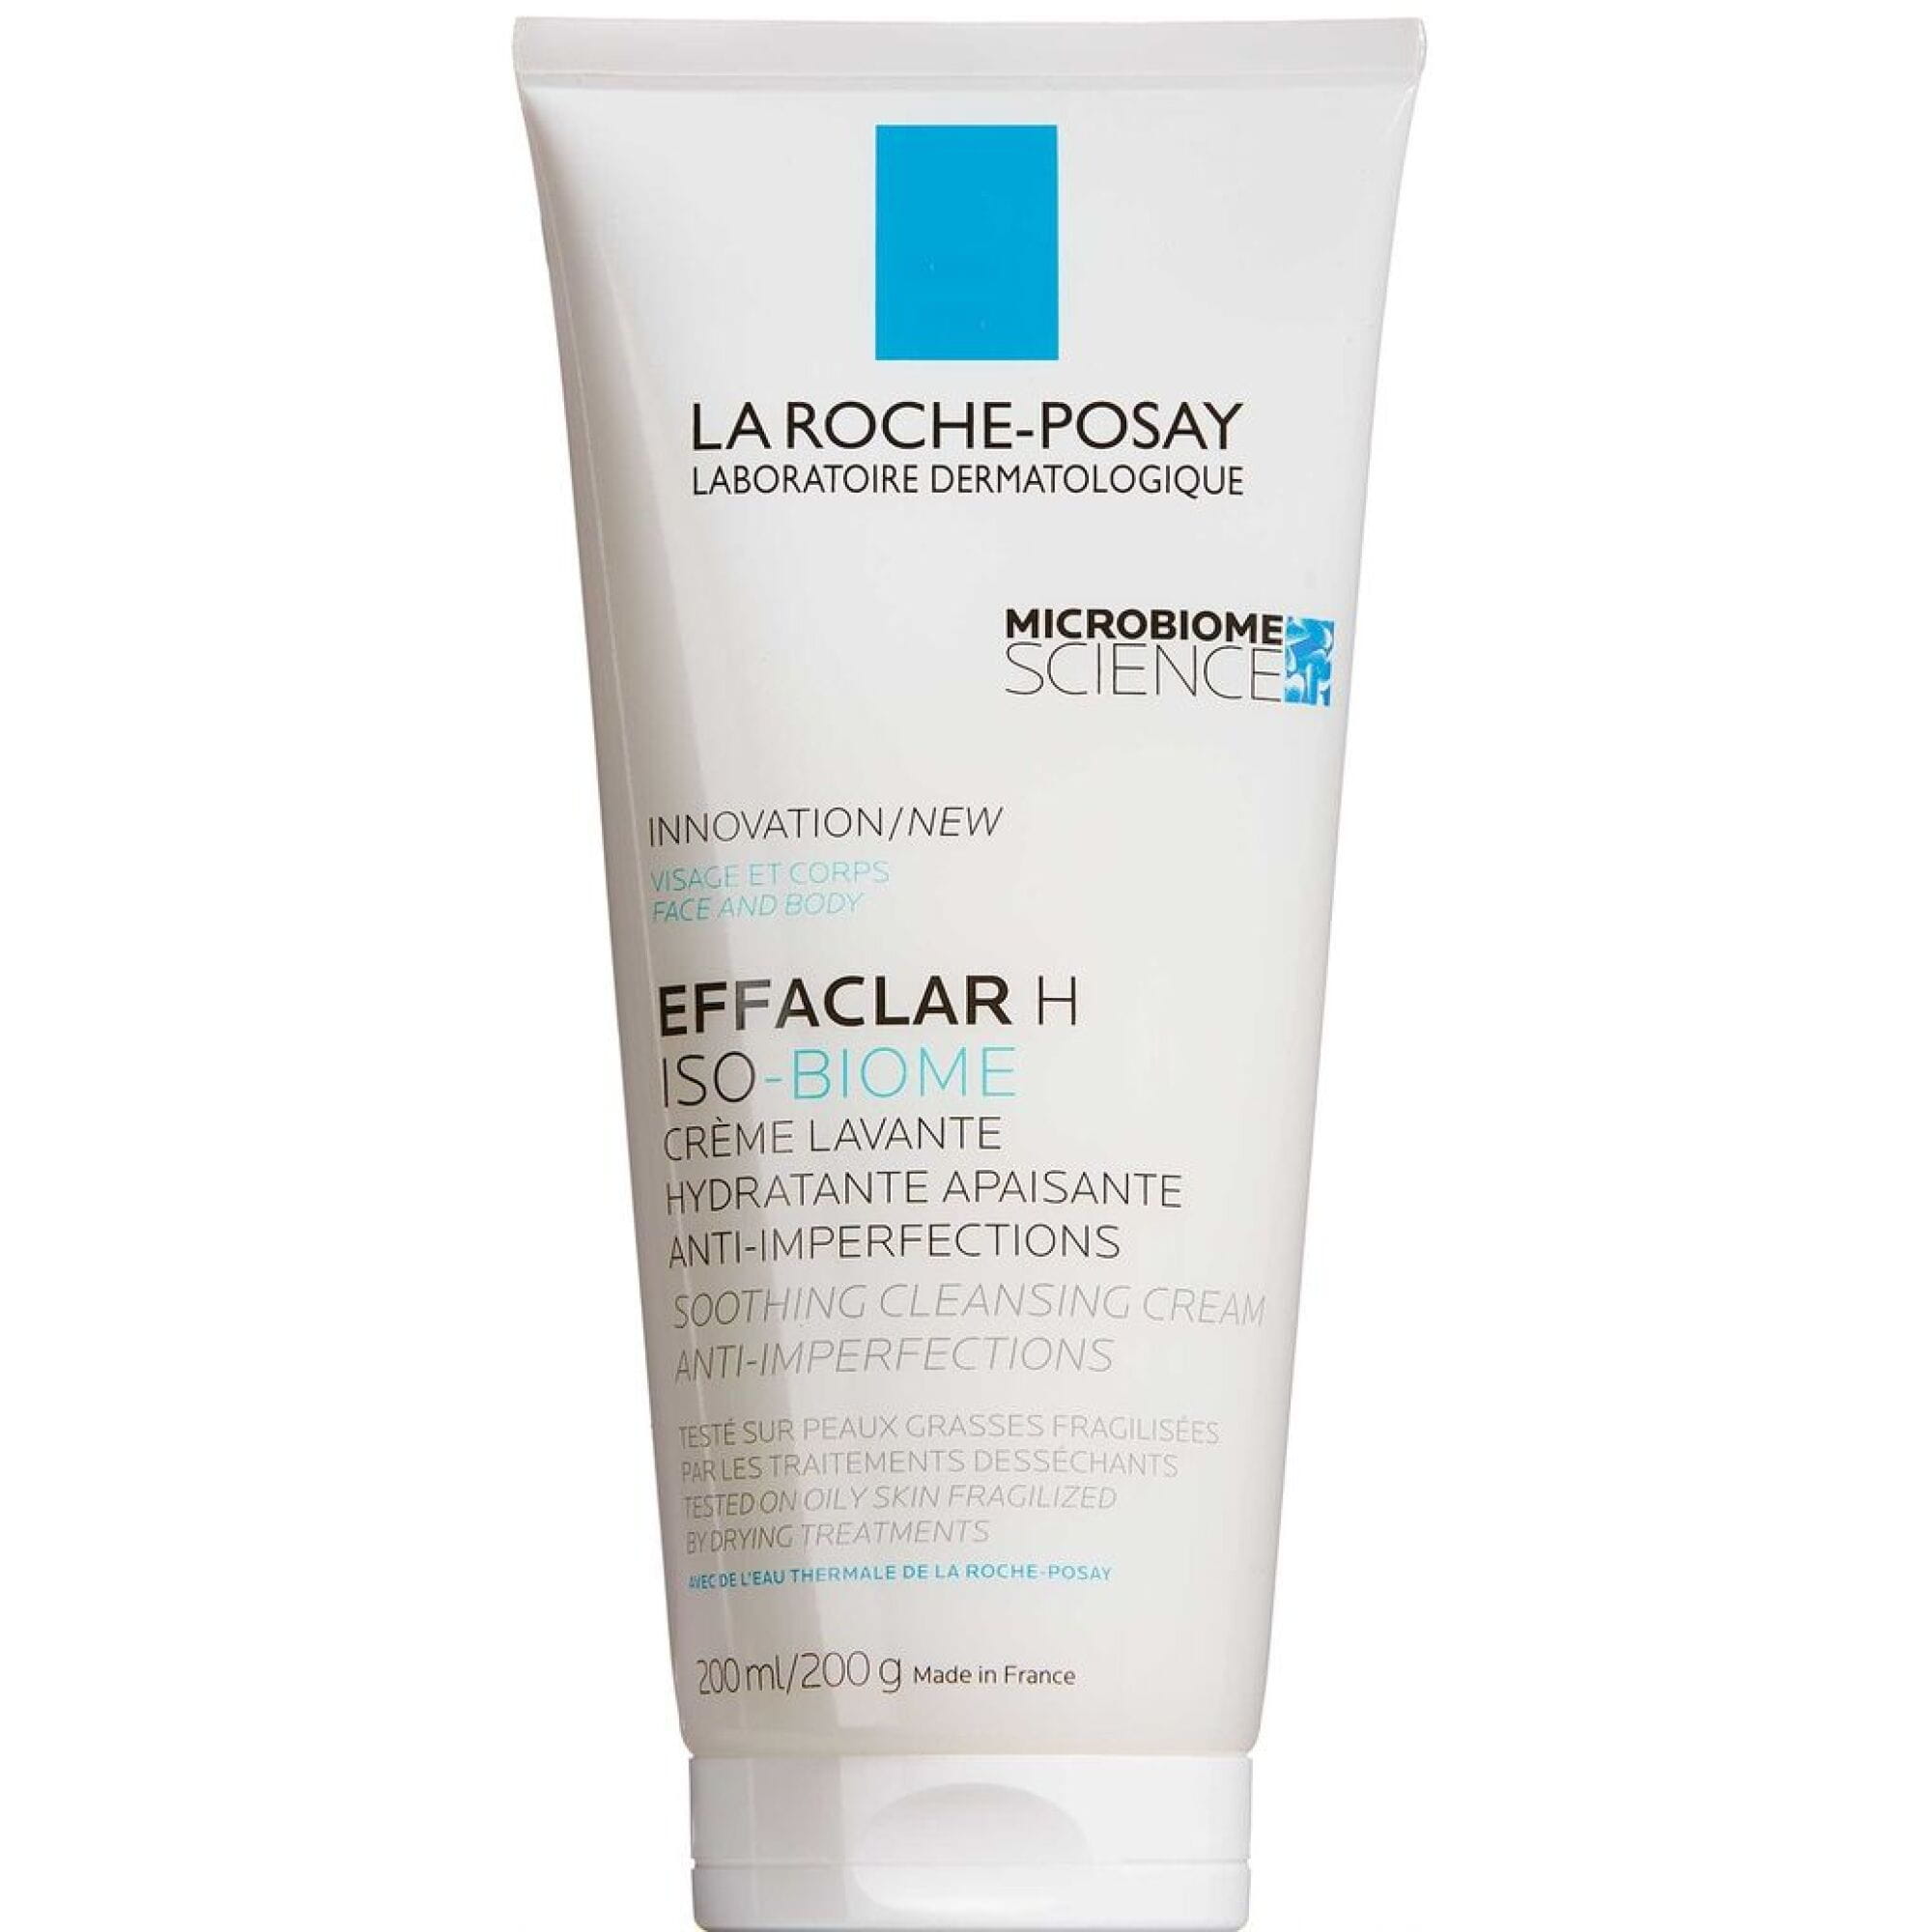 La Roche-PosayLa Roche-Posay ROCHE-POSAY Effaclar H Iso-Biome Rens CREME